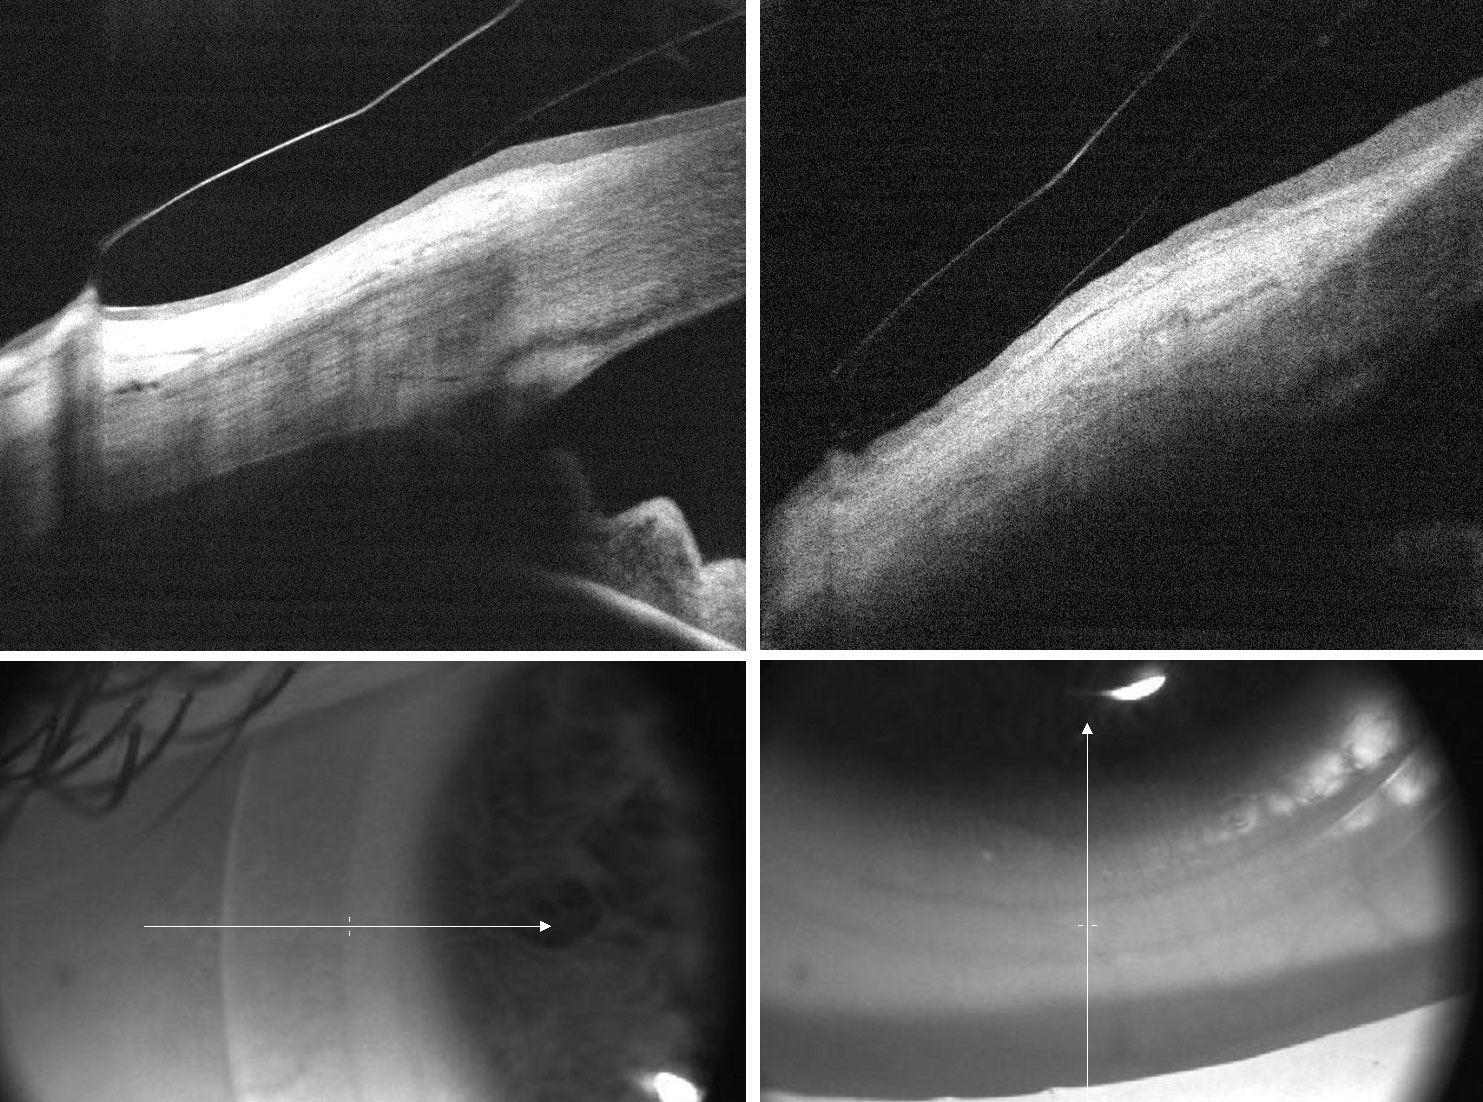 To correct edge lift in the vertical meridian in this trial fit spherical scleral lens, we ordered toric peripheral curves flatter along the horizontal and steeper along the vertical meridians.